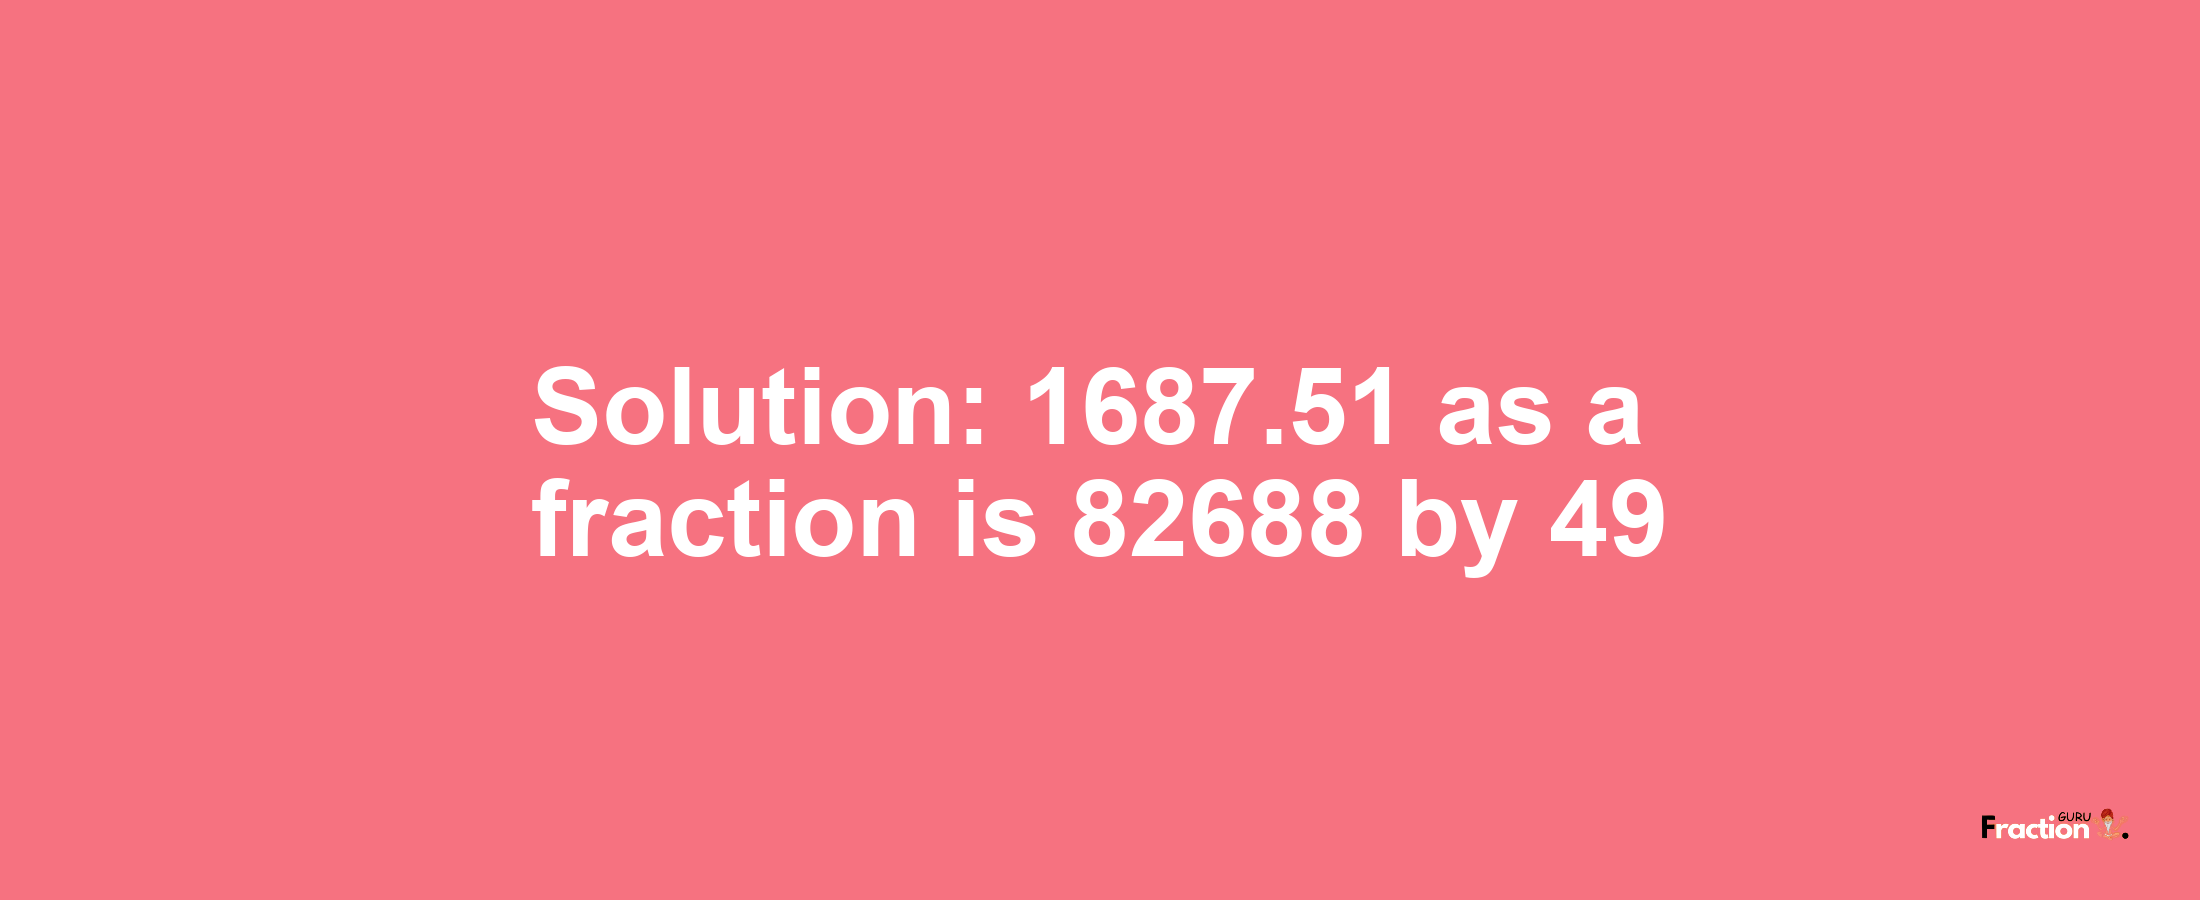 Solution:1687.51 as a fraction is 82688/49